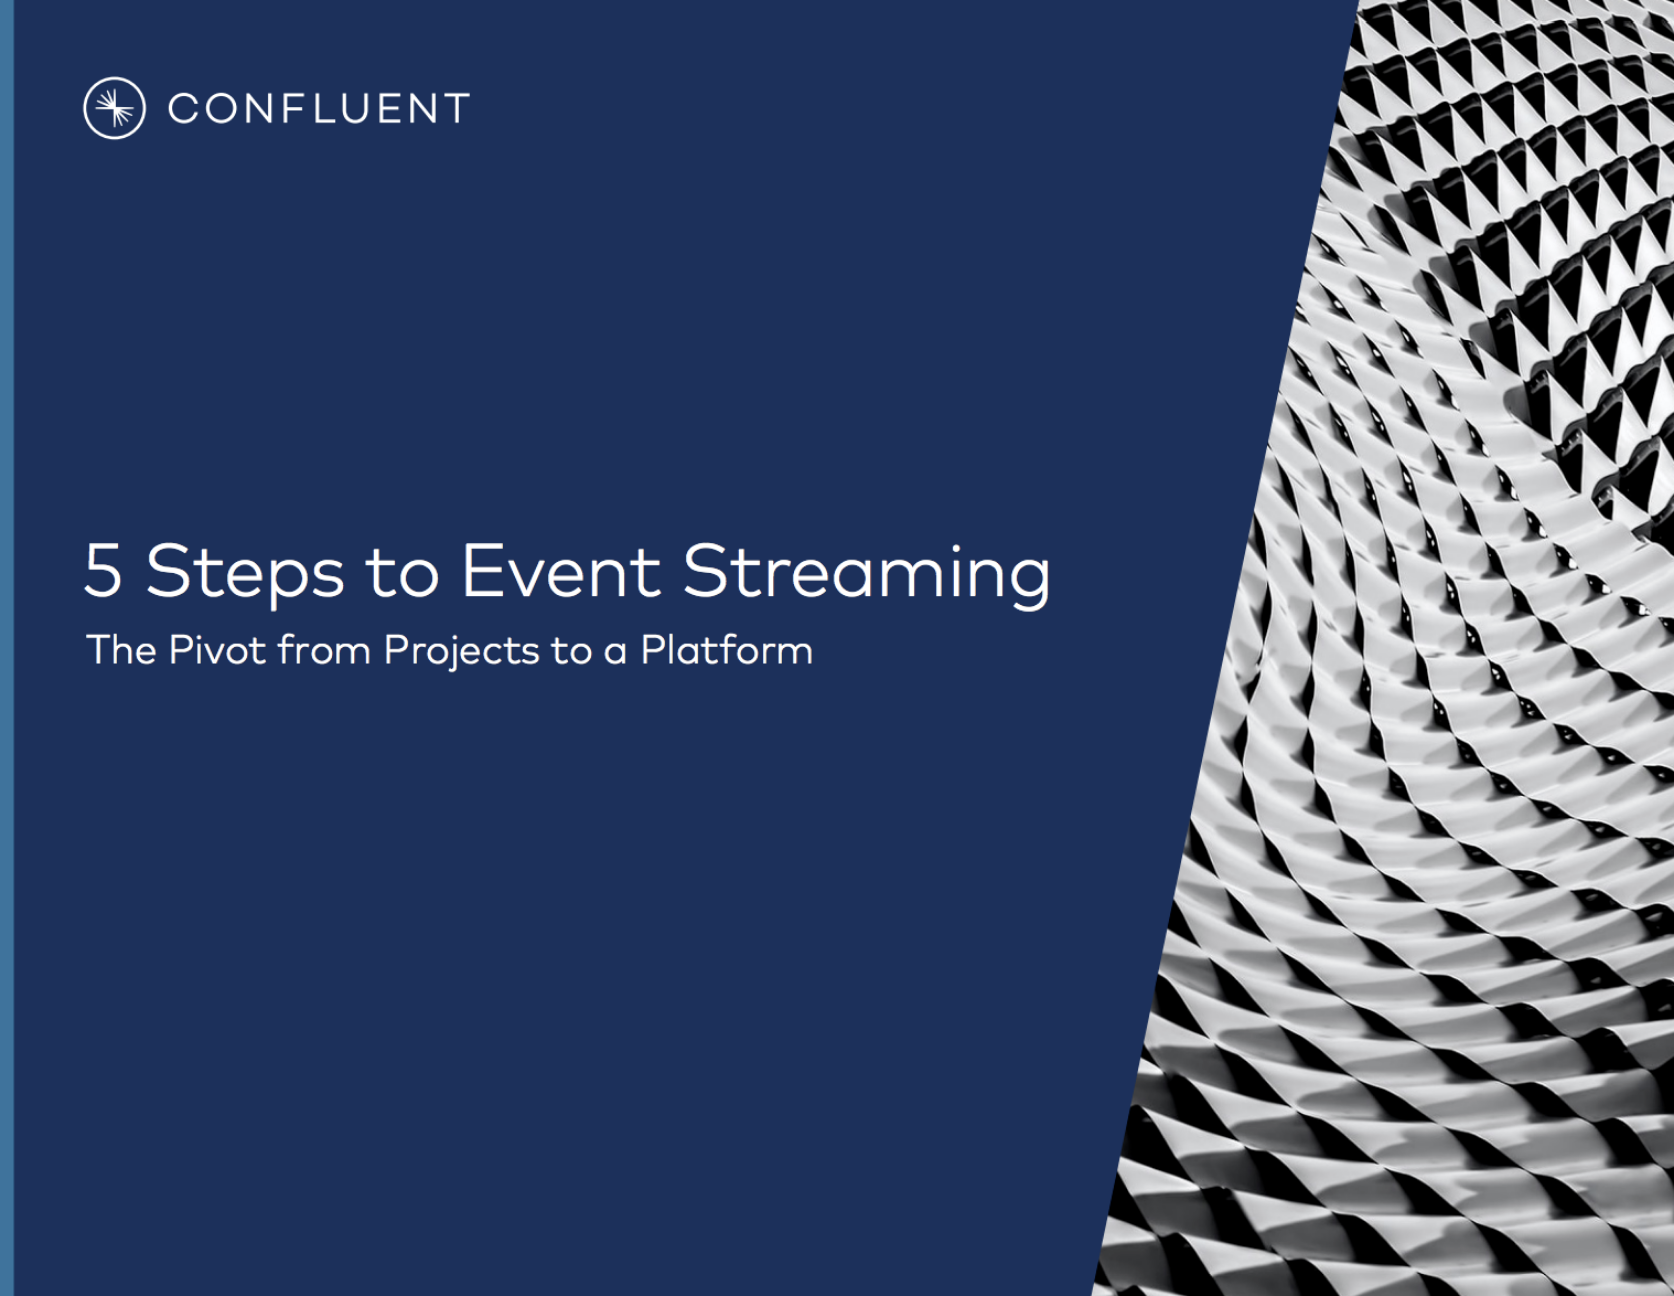 Screenshot 2020 10 22 20200929 EB Five Steps to Event Streaming pdf png PNG Image 1518 × 1174 pixels Scaled 55 - 5 Steps to Event Streaming: The Pivot from Projects to a Platform